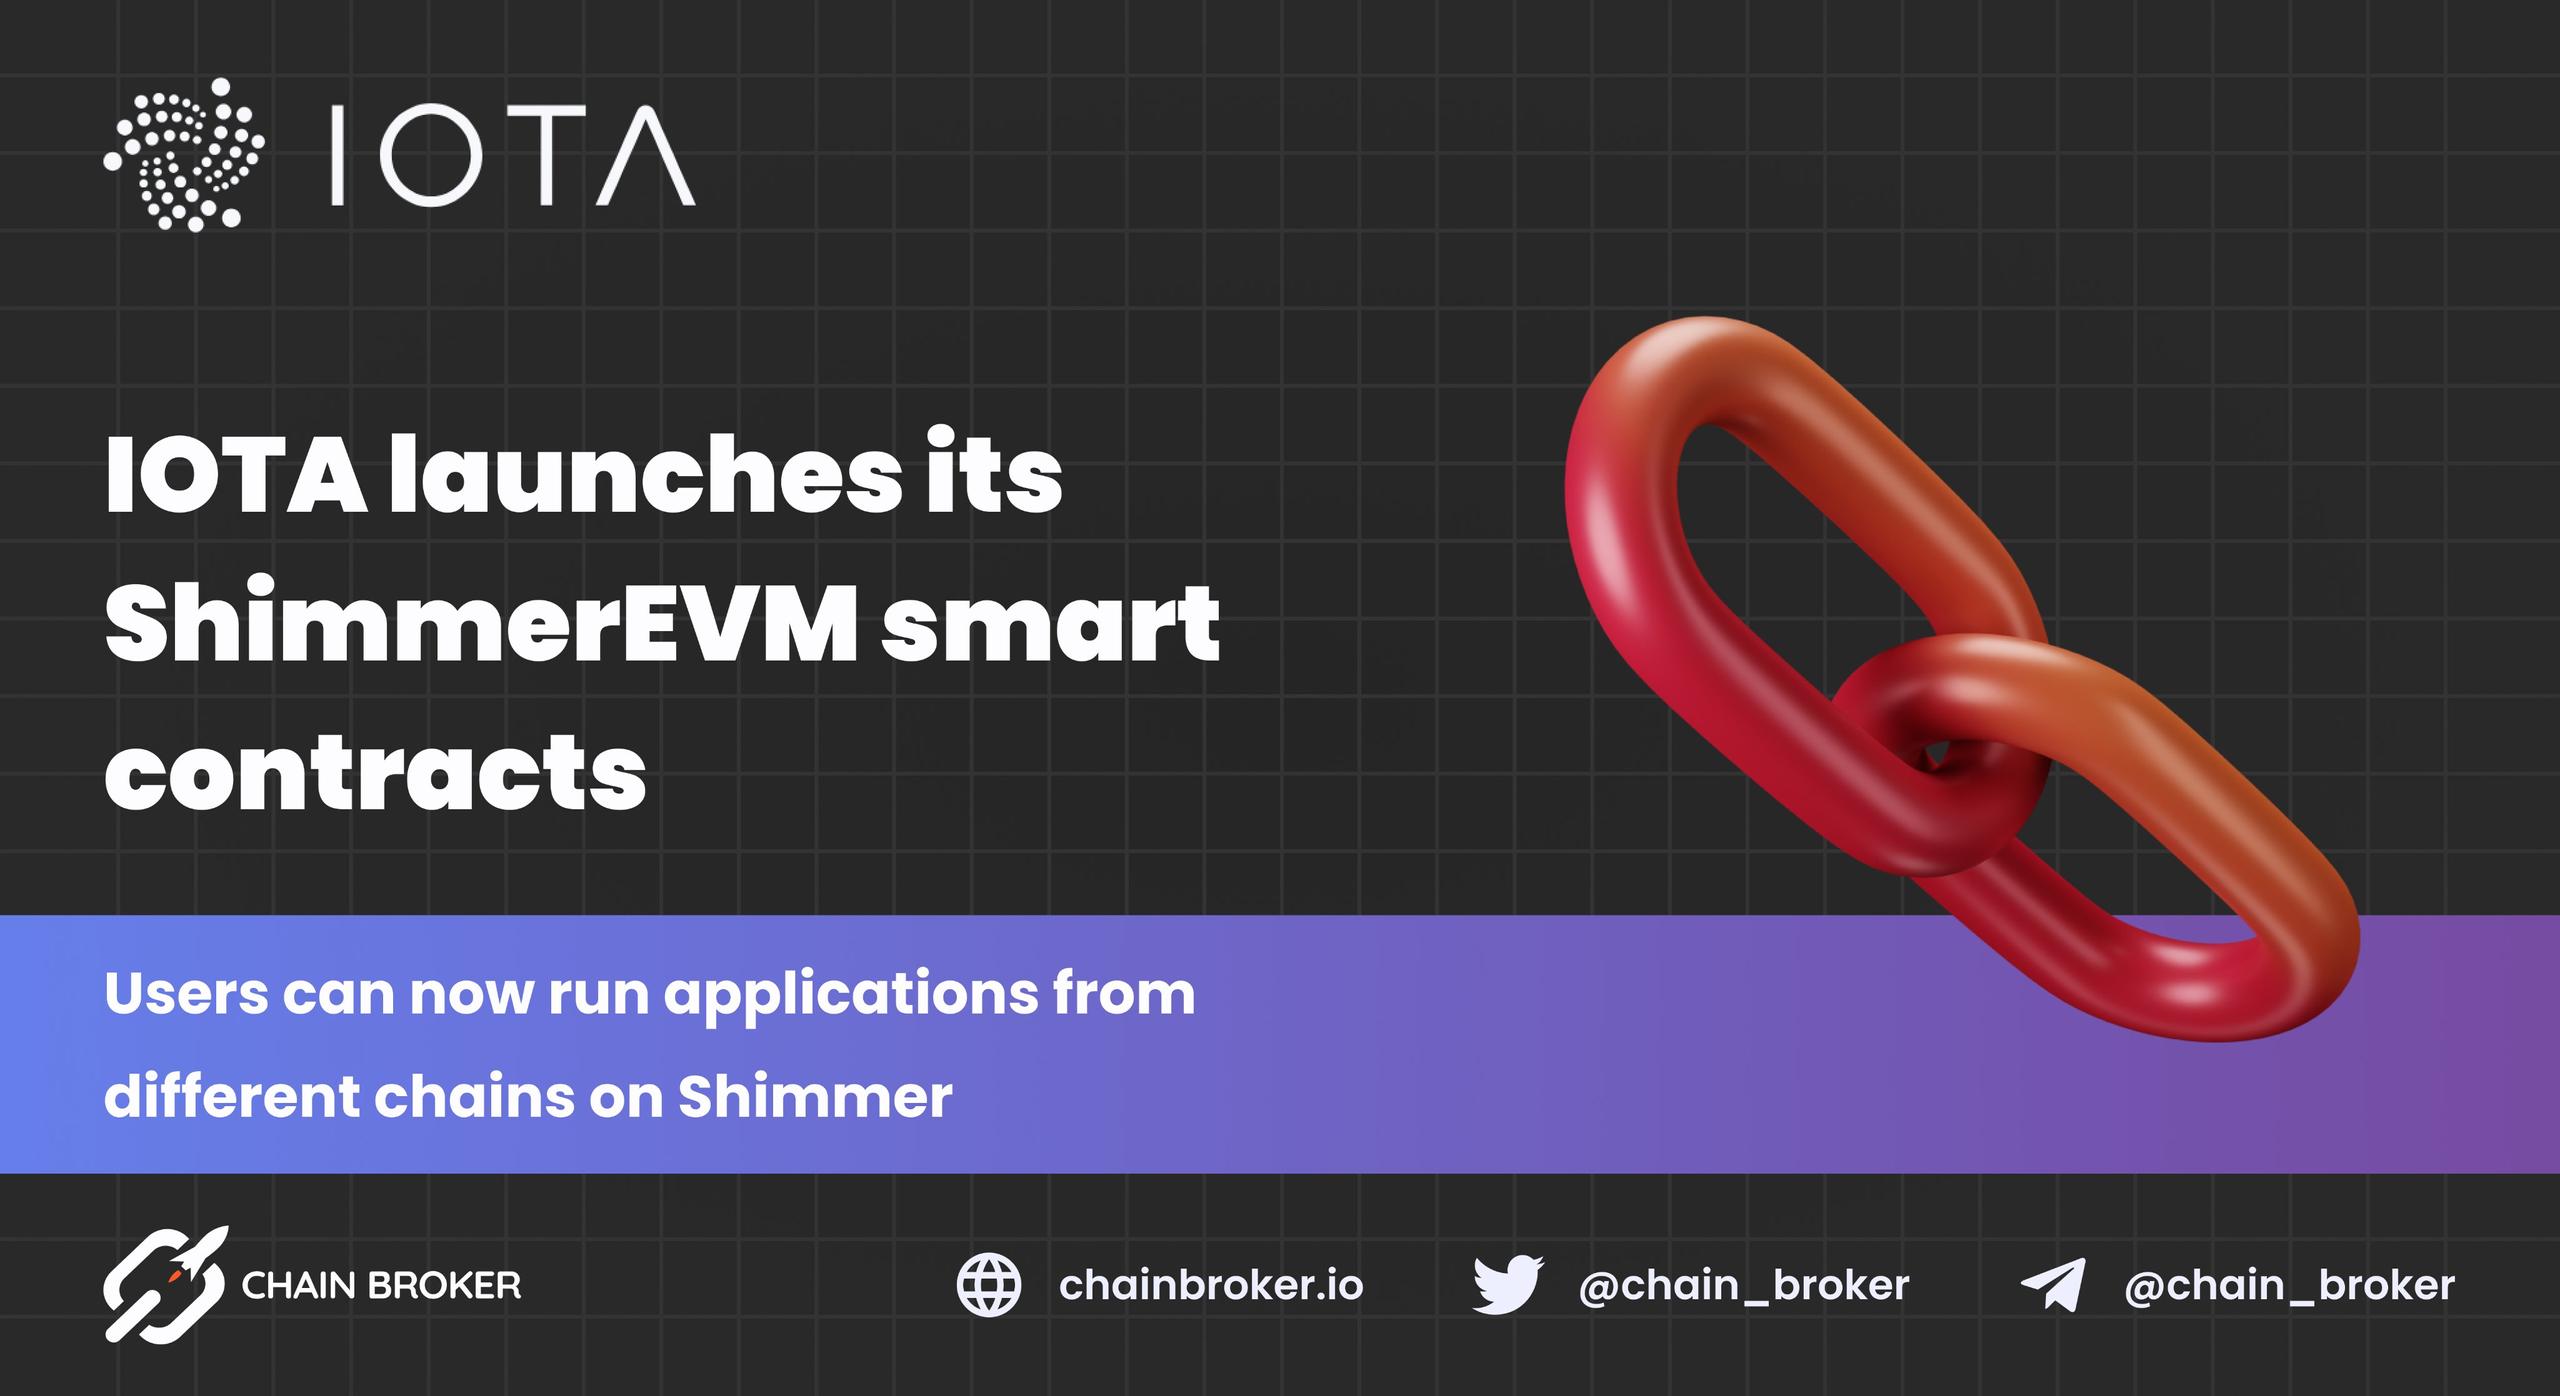 IOTA launches its ShimmerEVM smart contracts